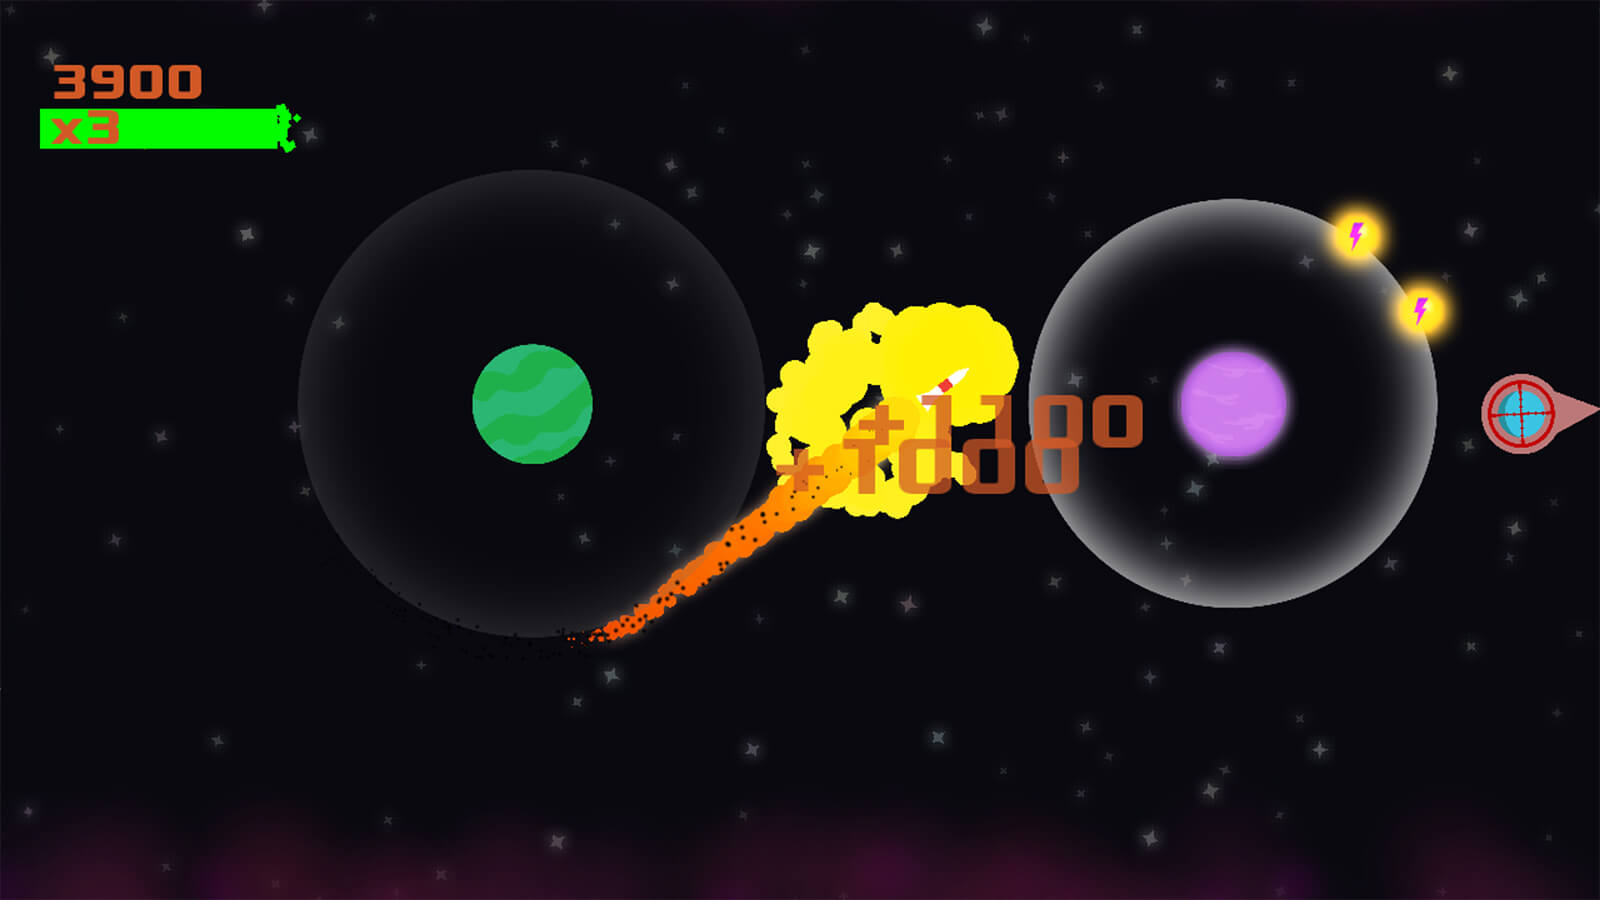 A rocket blasts from a green planet to a pink one, collecting power ups and points in between.